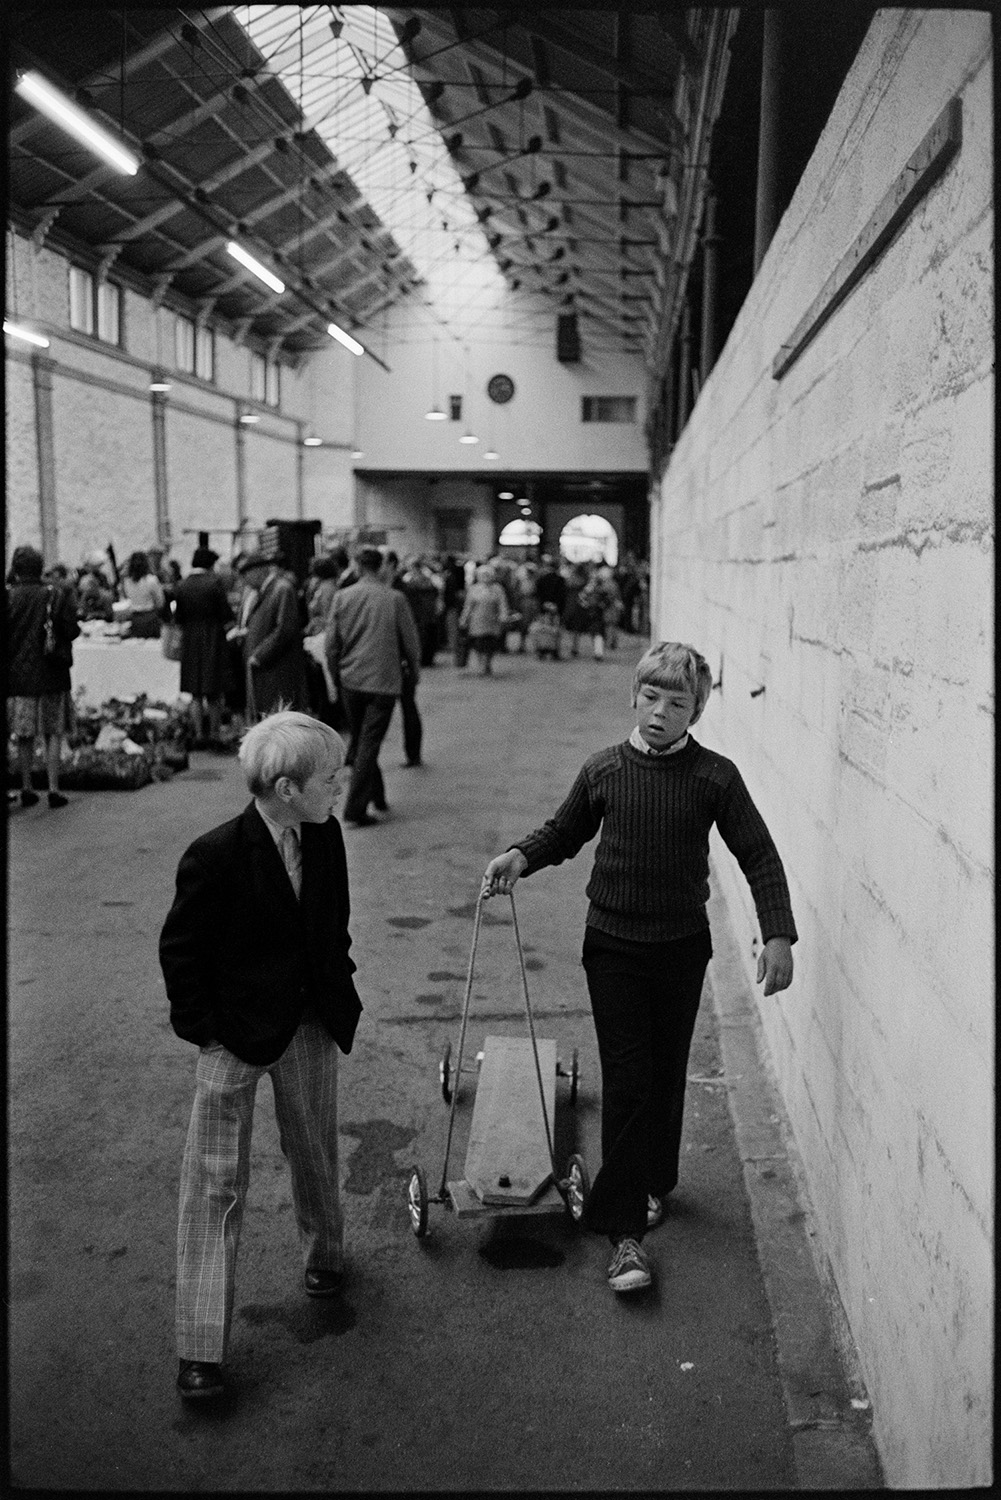 Market hall with stalls, fruit, vegetables and flowers, customers. 
[Two boys in South Molton Pannier Market with a soapbox or scooter. Men and women can be seen shopping at stalls in the market in the background.]